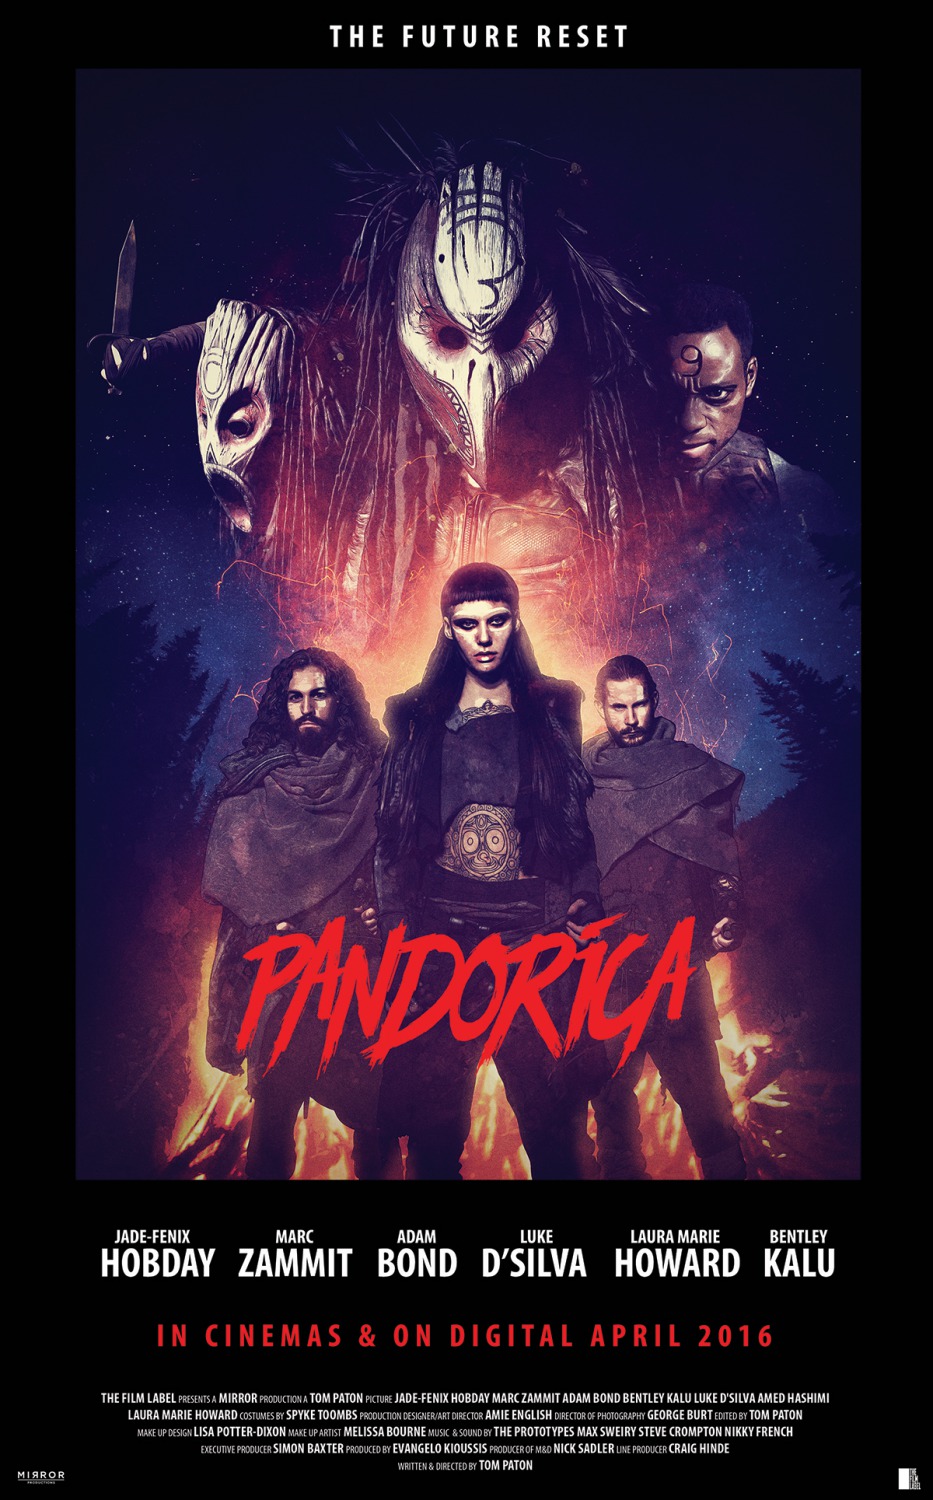 Extra Large Movie Poster Image for Pandorica 